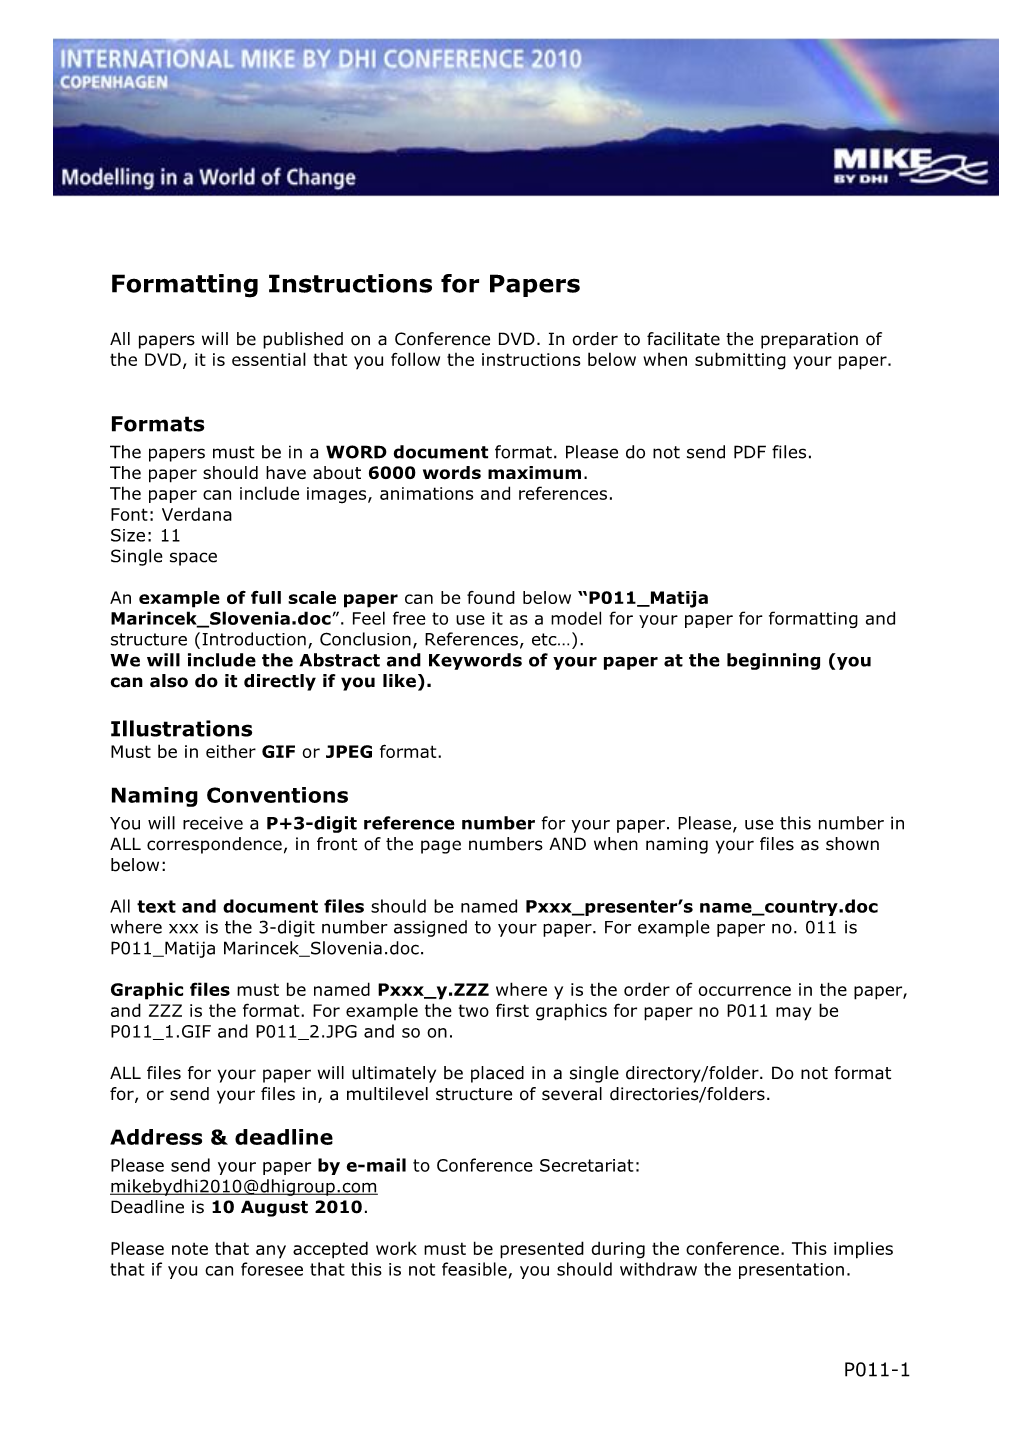 Formatting Instructions for Papers